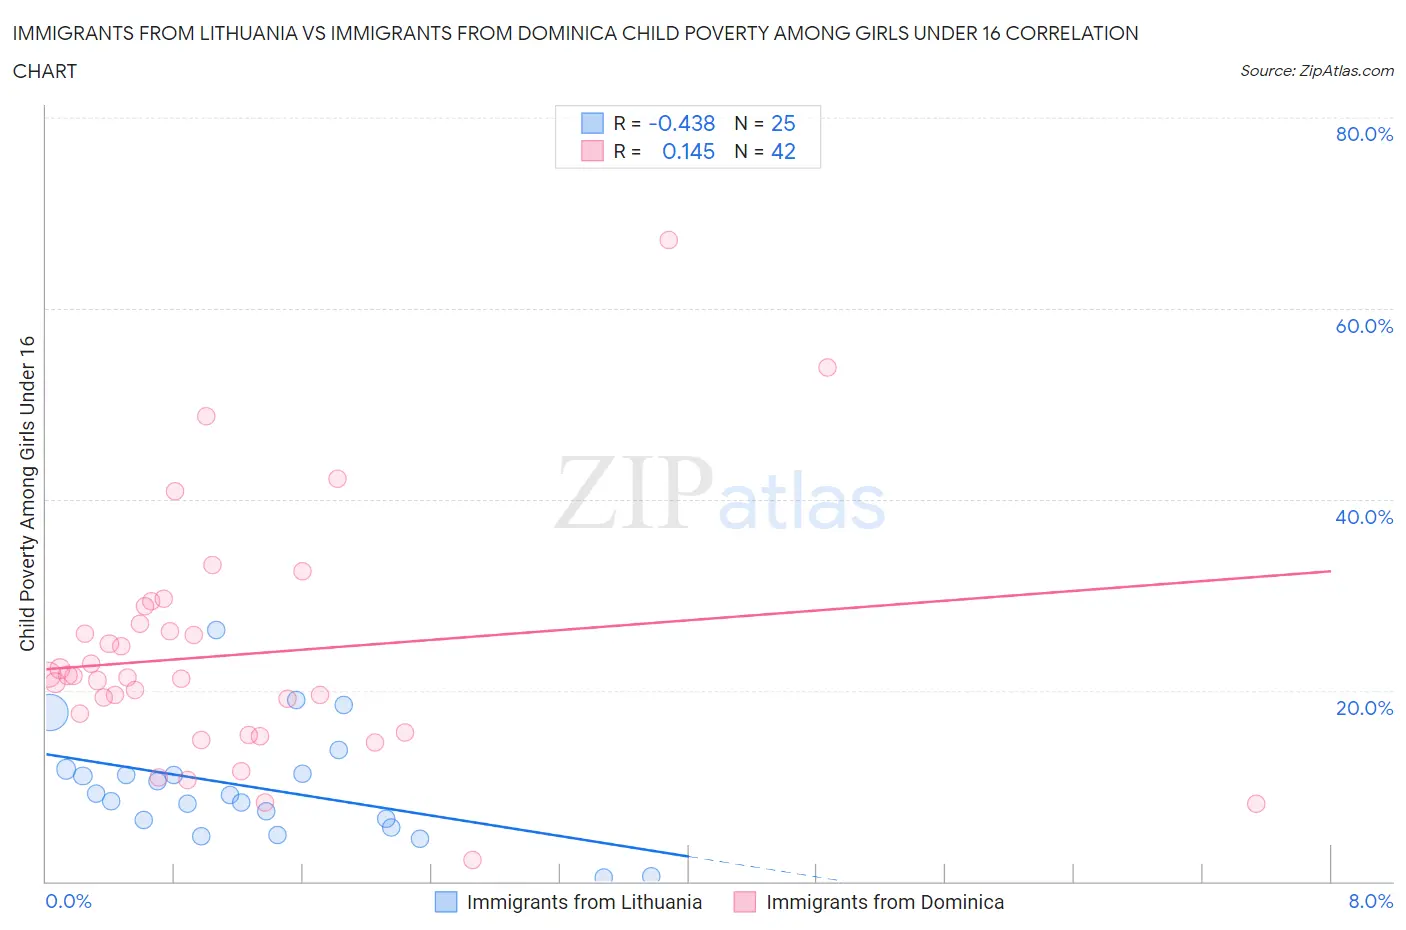 Immigrants from Lithuania vs Immigrants from Dominica Child Poverty Among Girls Under 16